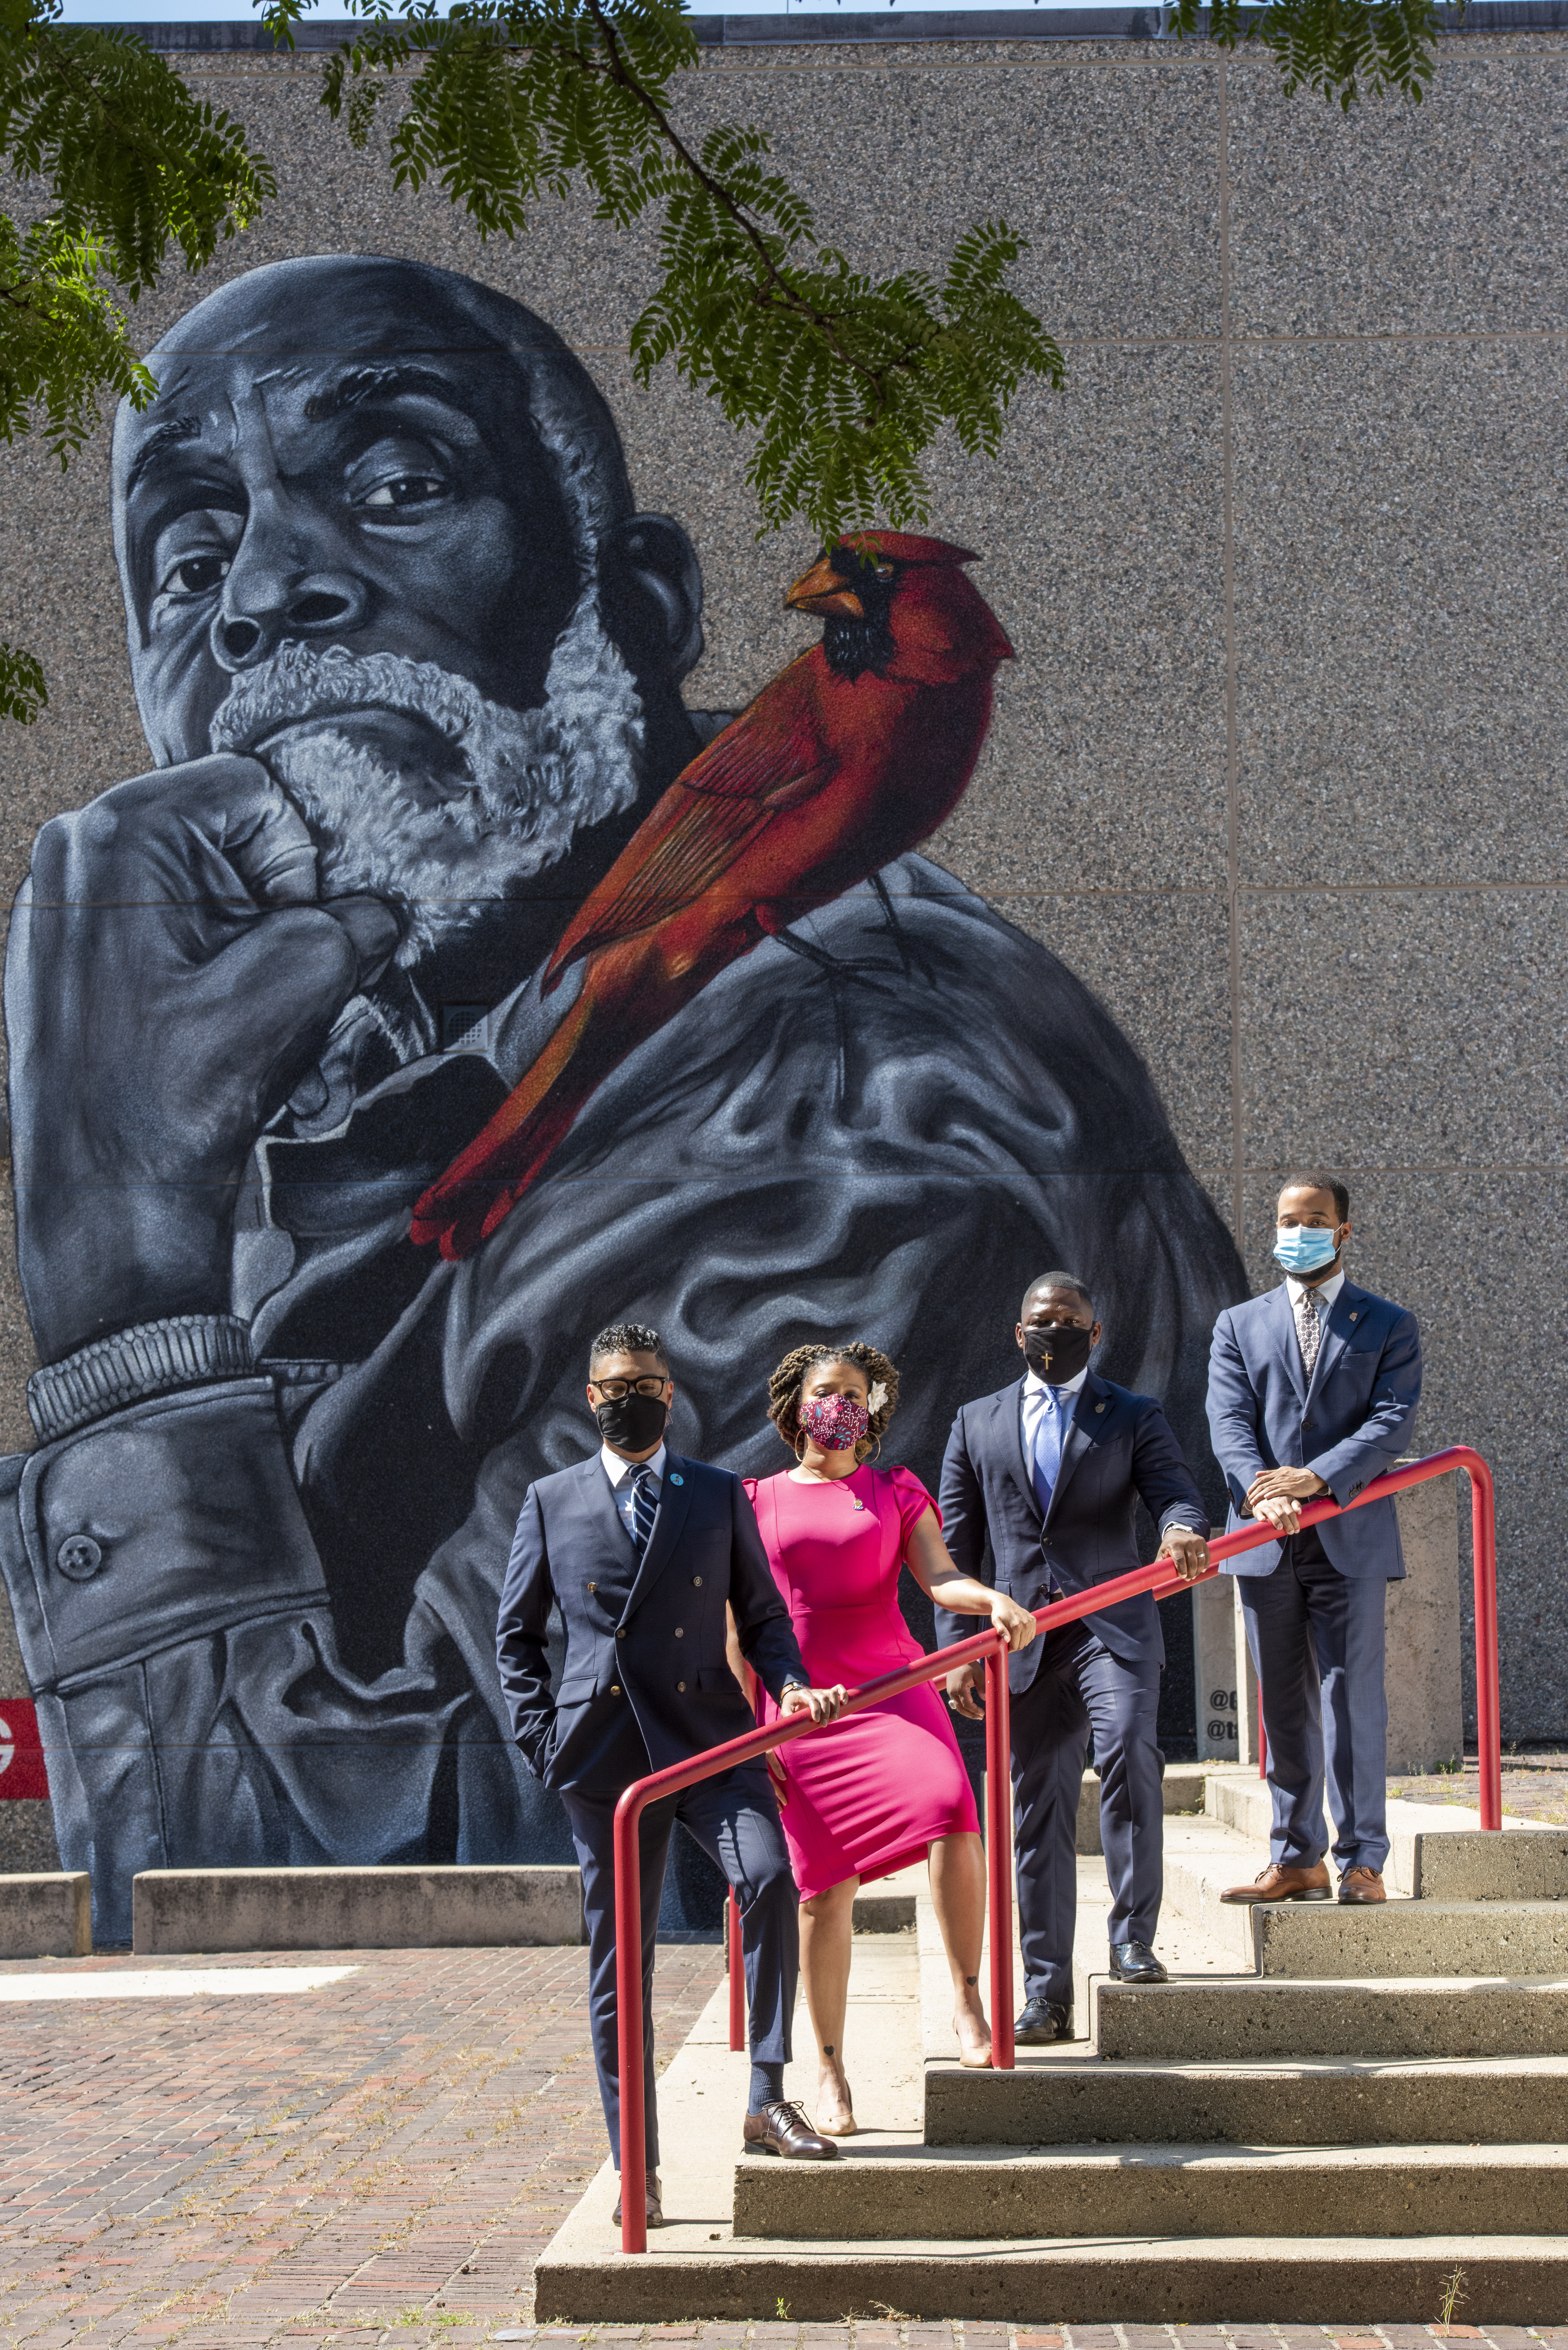 Imari Paris Jeffries, Sheena Collier, Willie Brodick and Segun Idowu standing in a row on a set of concrete stairs, outside with masks on. Behind them is a concrete wall witha. large mural of Mel King with a cardinal on his shoulder. Branches and leaves of a tree peak into the top of the frame. 